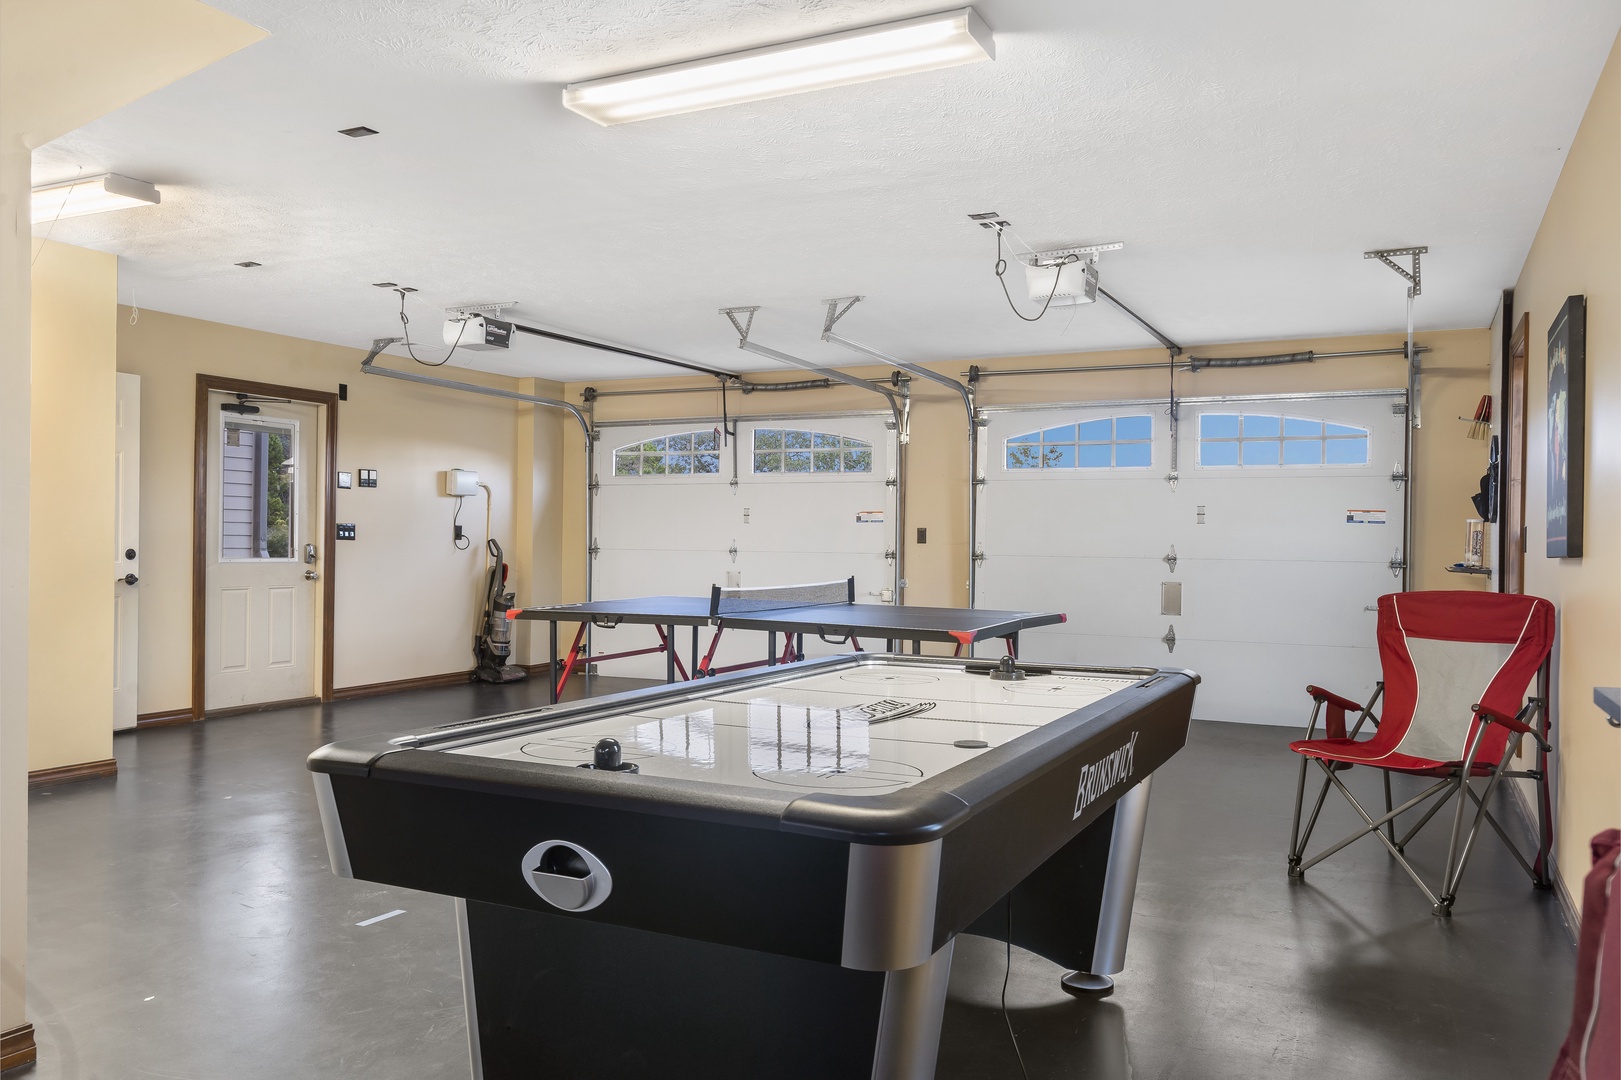 Billiards, ping pong, and air hockey all accessible for some good fun!